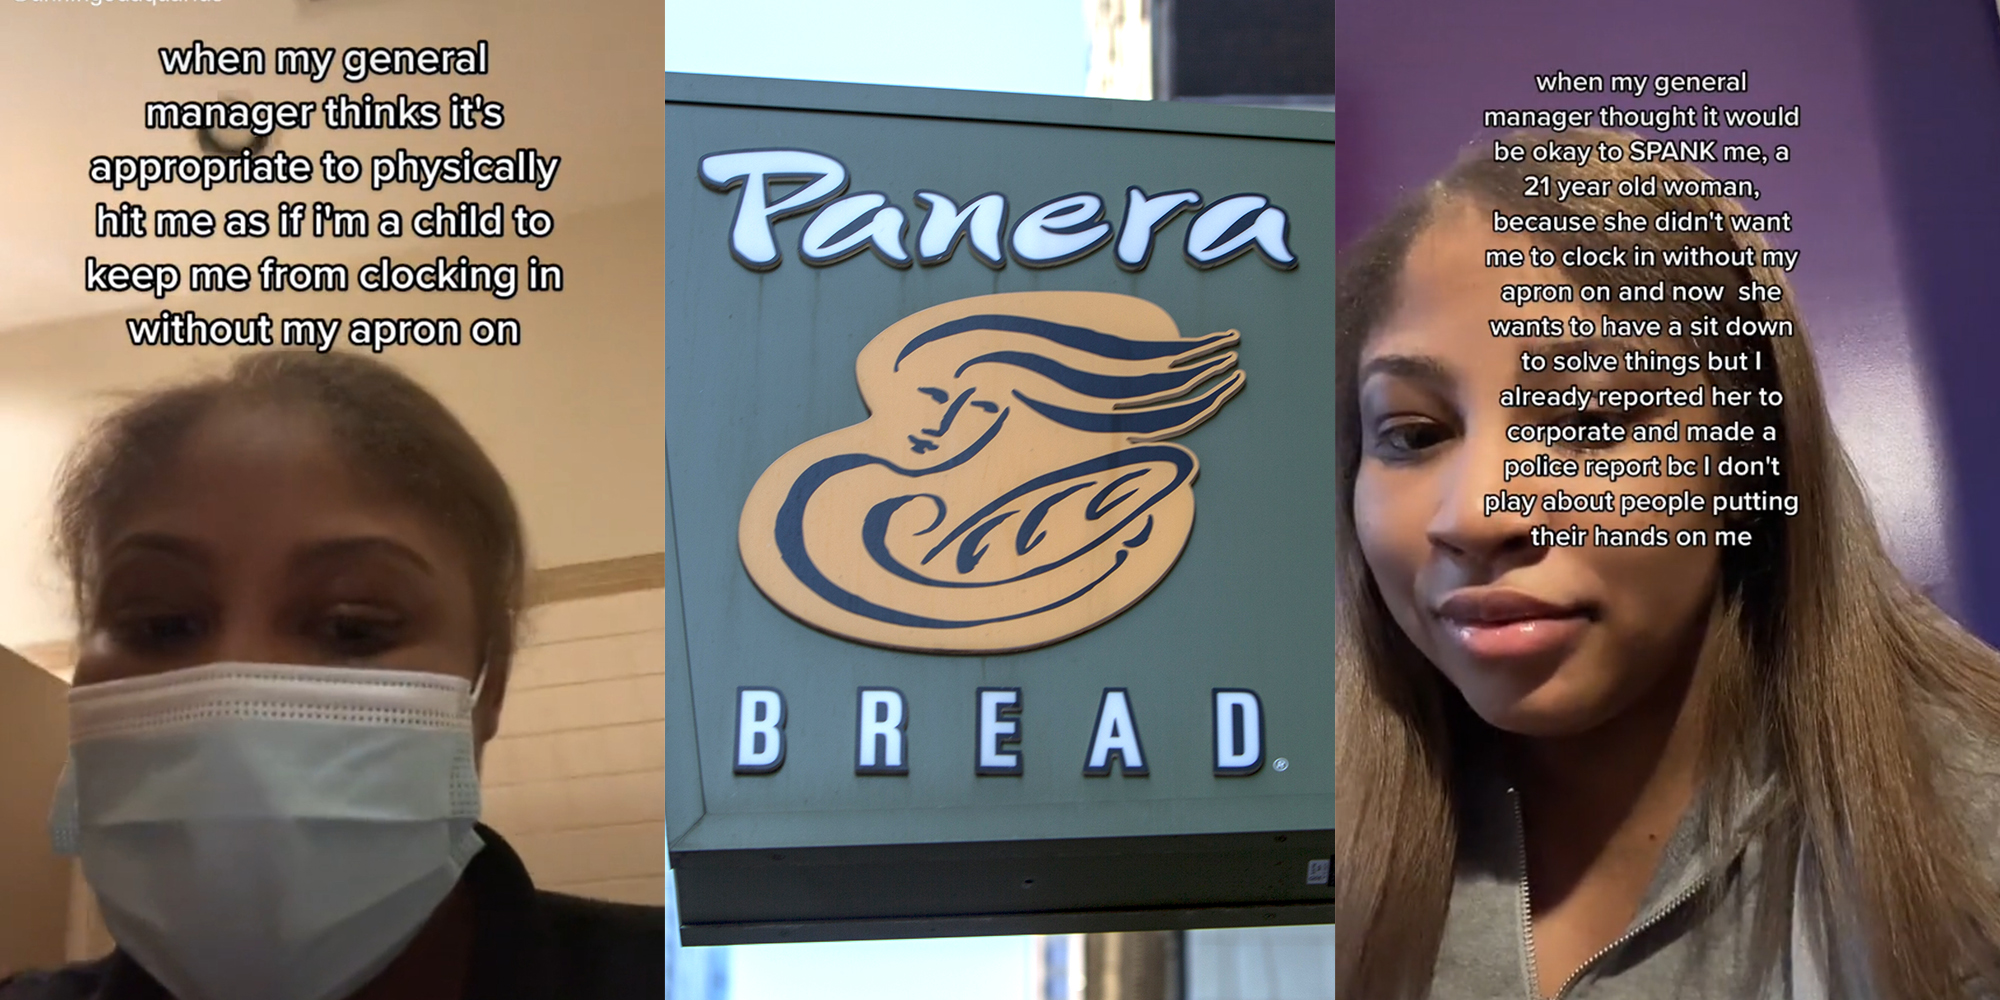 21-Year-Old Worker Says Her Manager at Panera Spanked picture